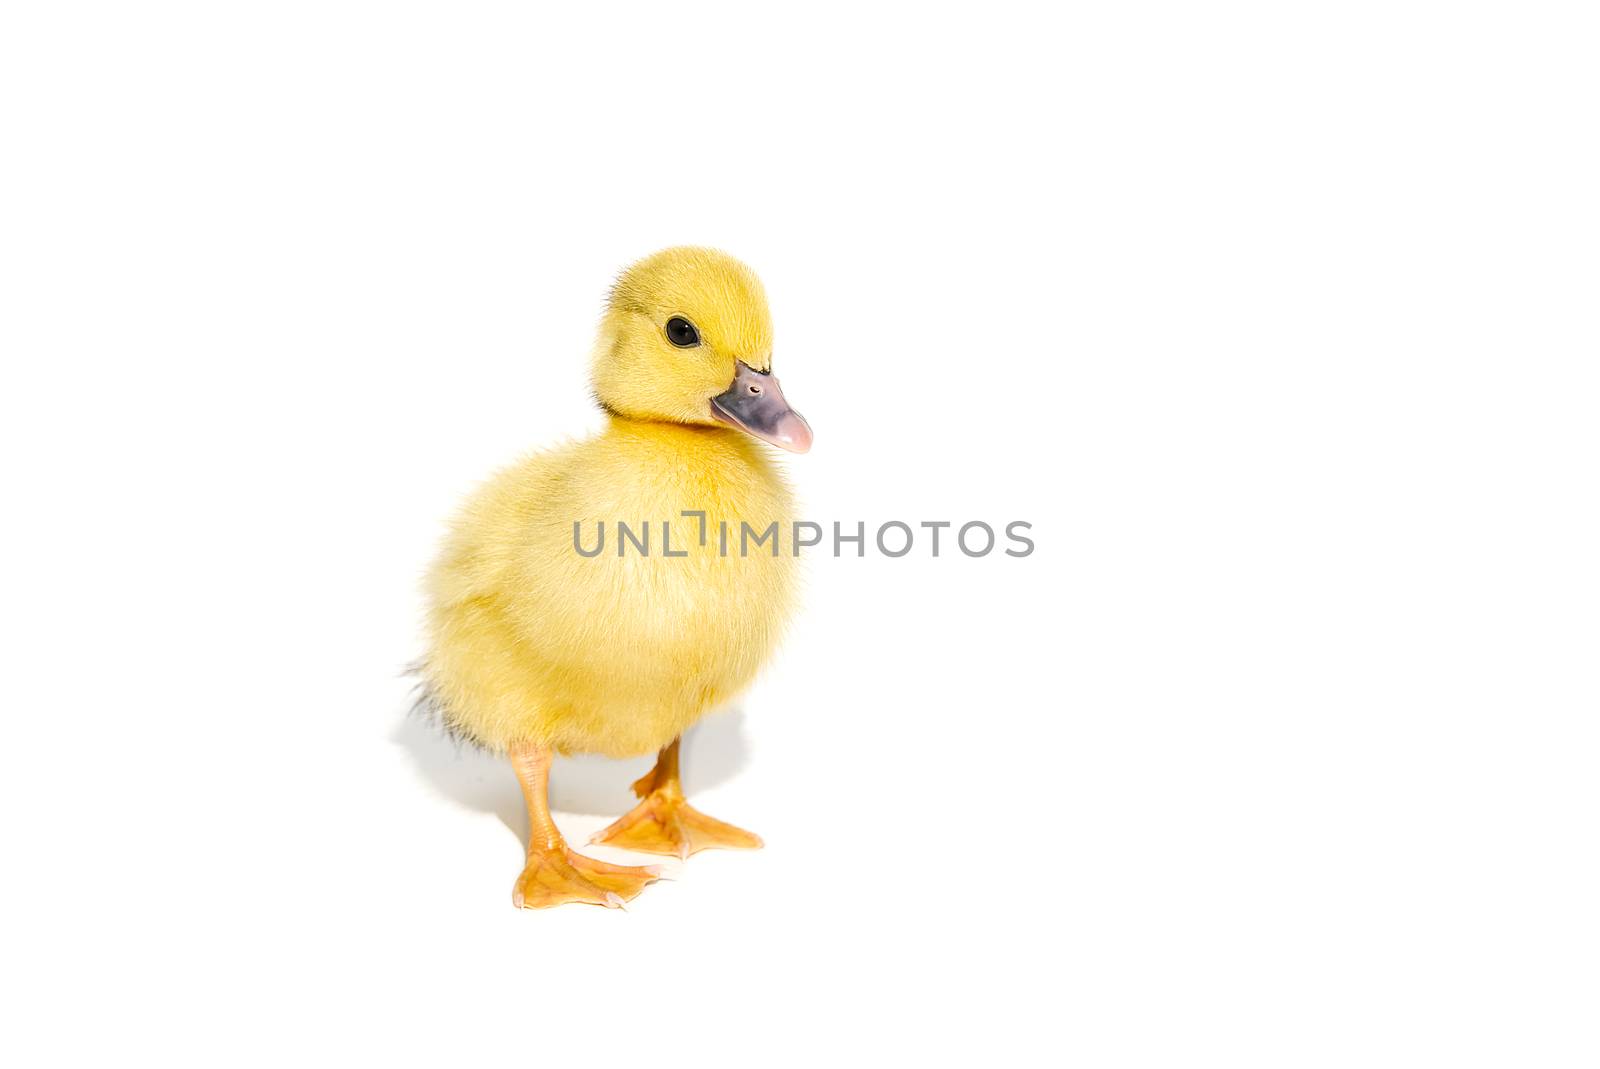 NewBorn little Cute yellow duckling isolated on white